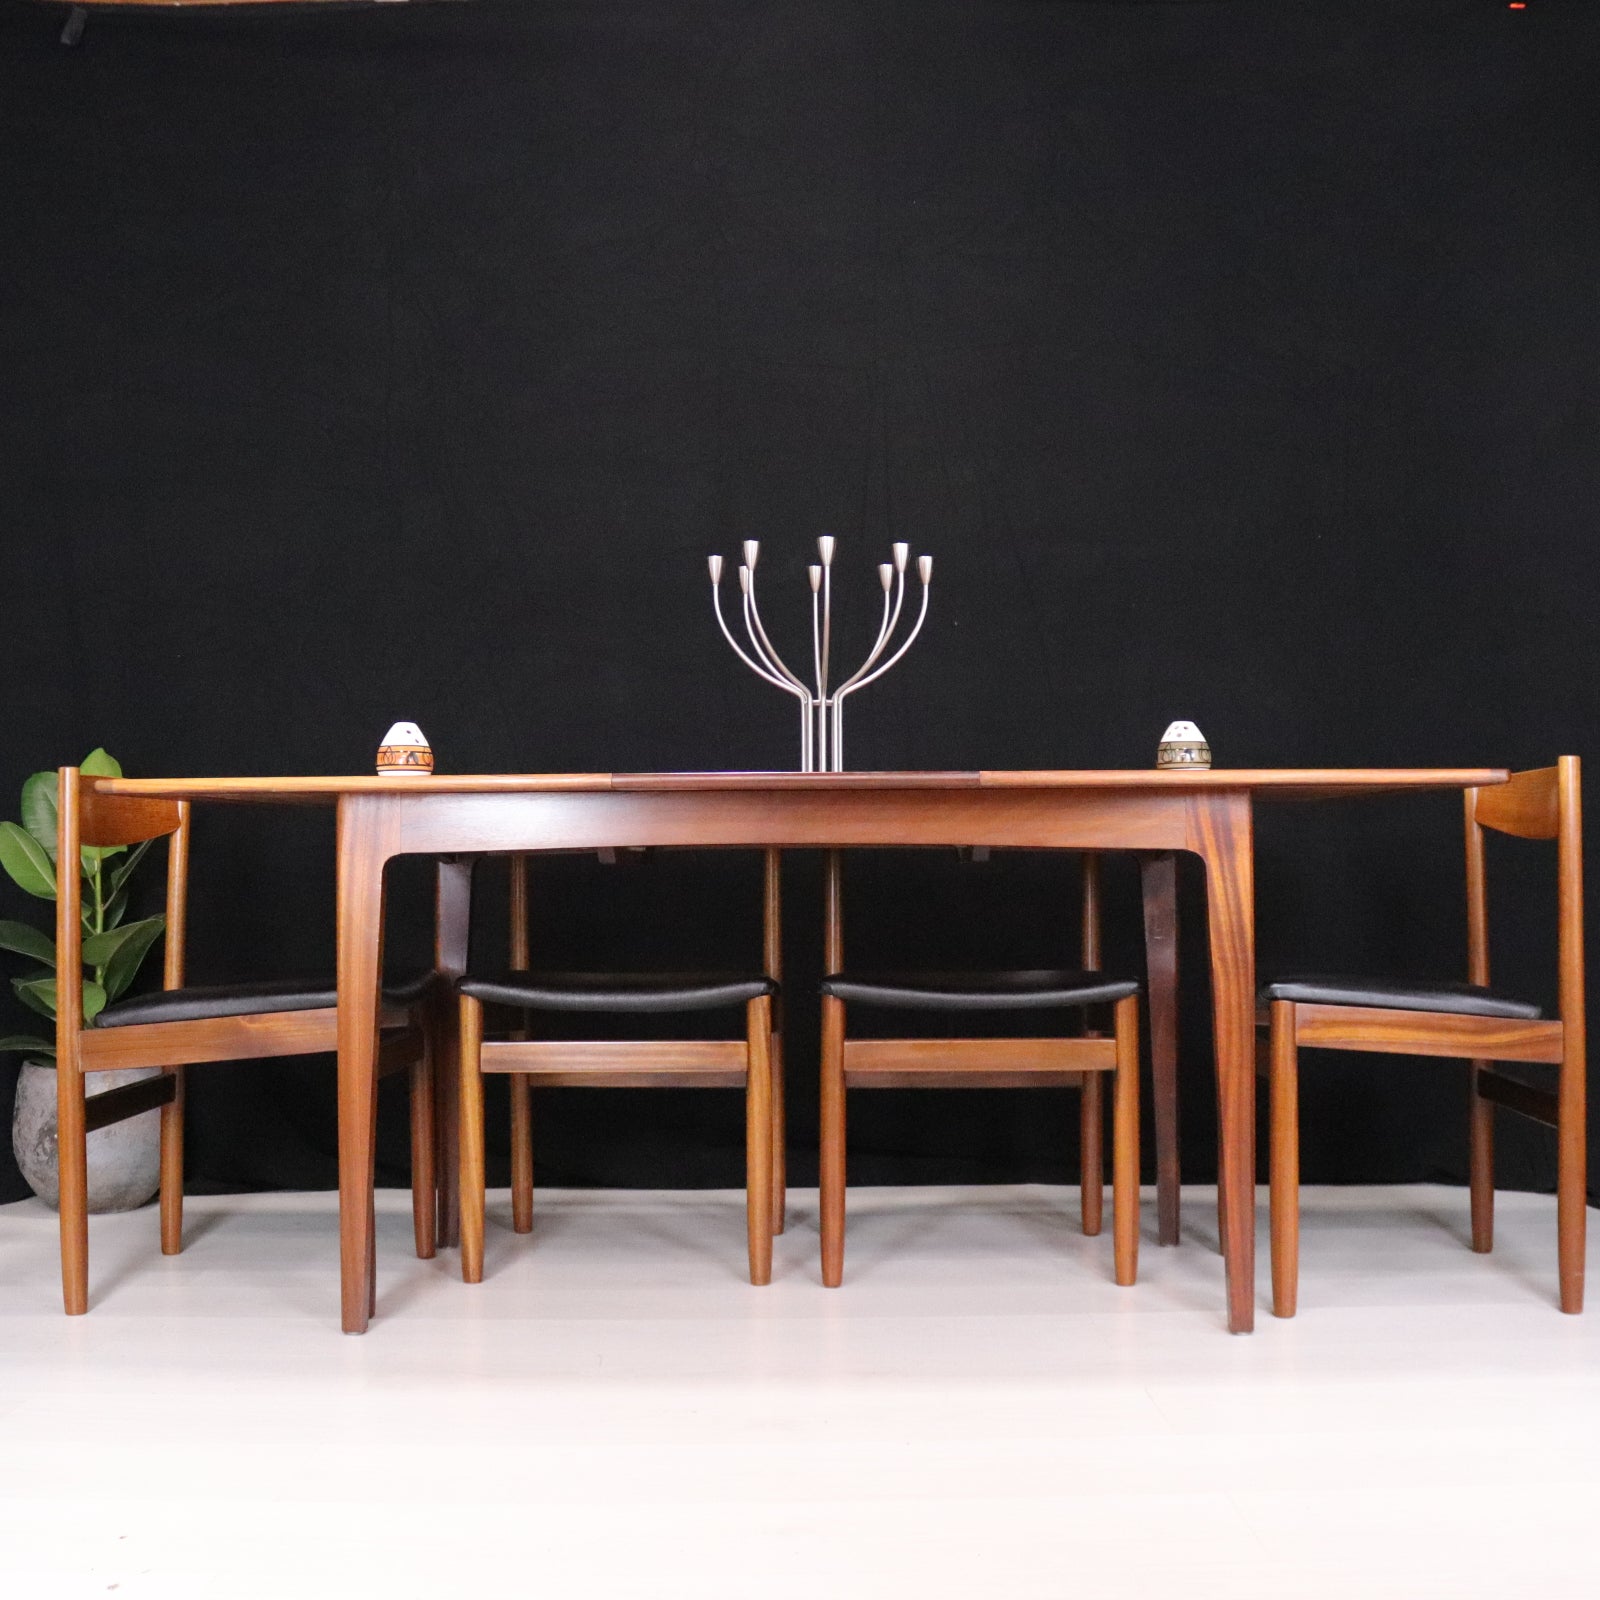 A. Younger Teak and Afromosia Dining Table and Chairs Set - teakyfinders